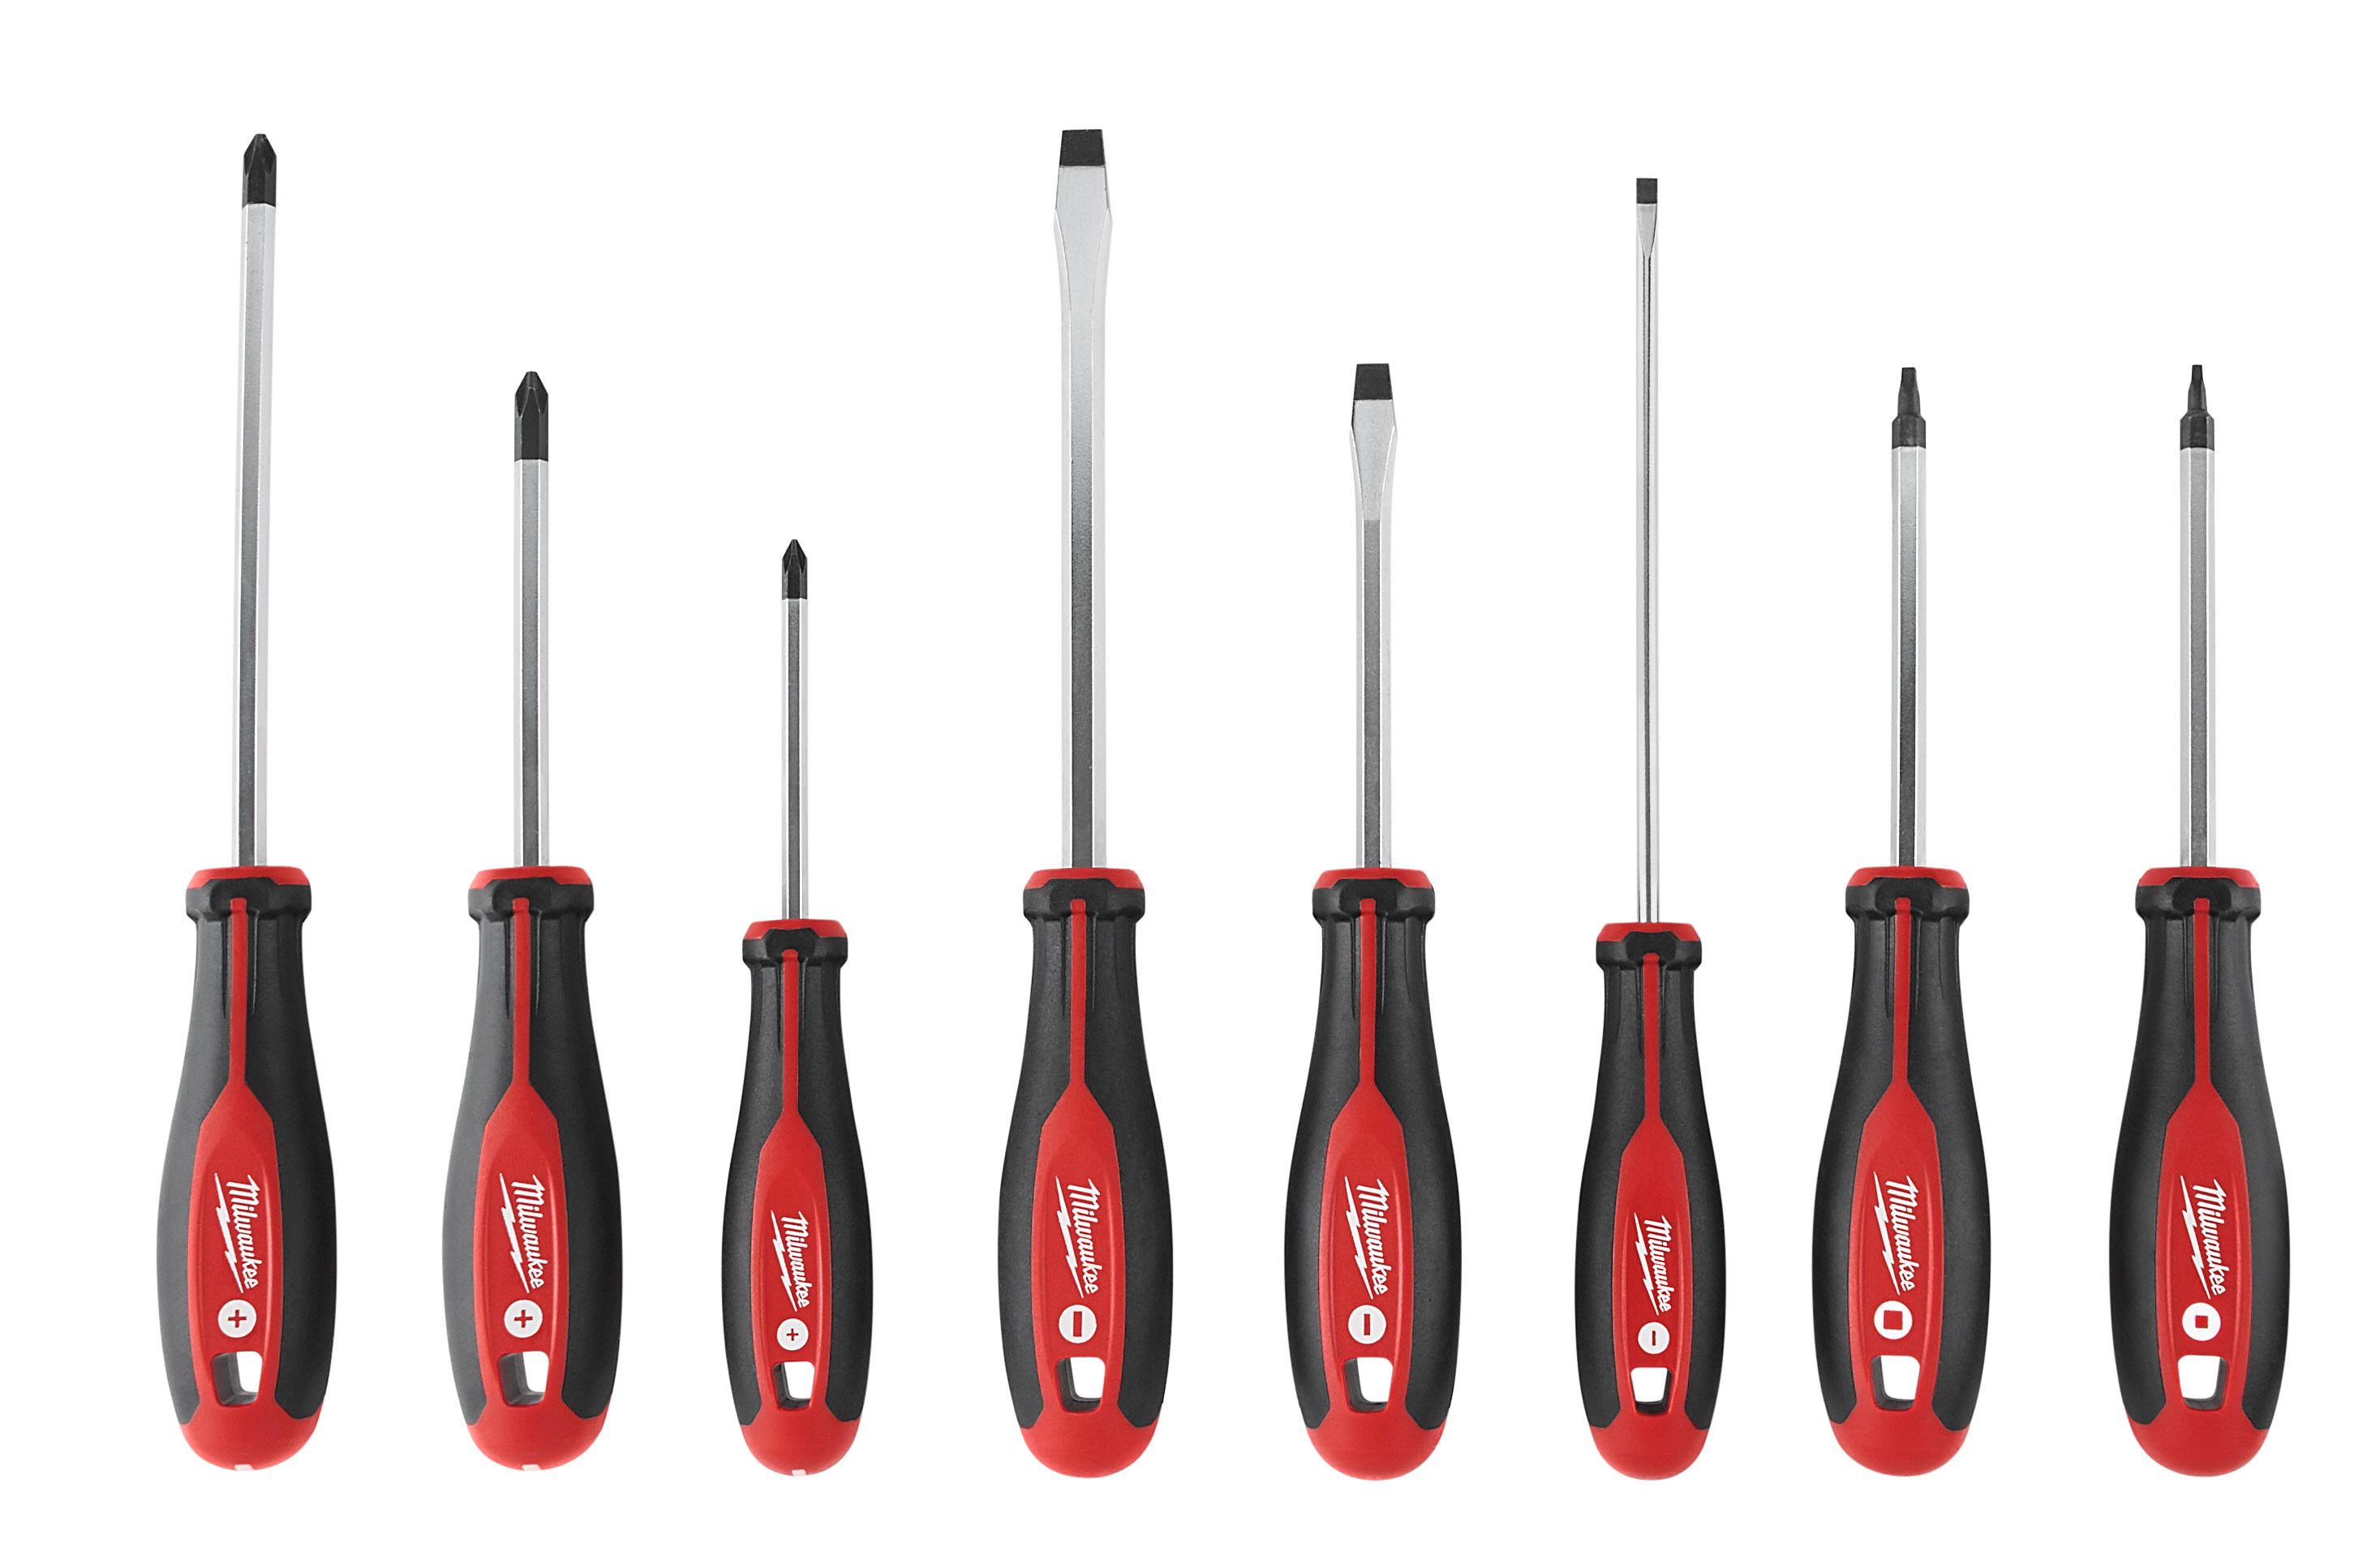 Featuring hardened tips & forged shanks the Milwaukee® 8 piece screwdriver set provides professional grade solutions and durability to the user. Bit types are marked on the cap of each tool for quick identification and increased efficiency. The comfortable tri-lobe handle allows users to comfortably apply more leverage.